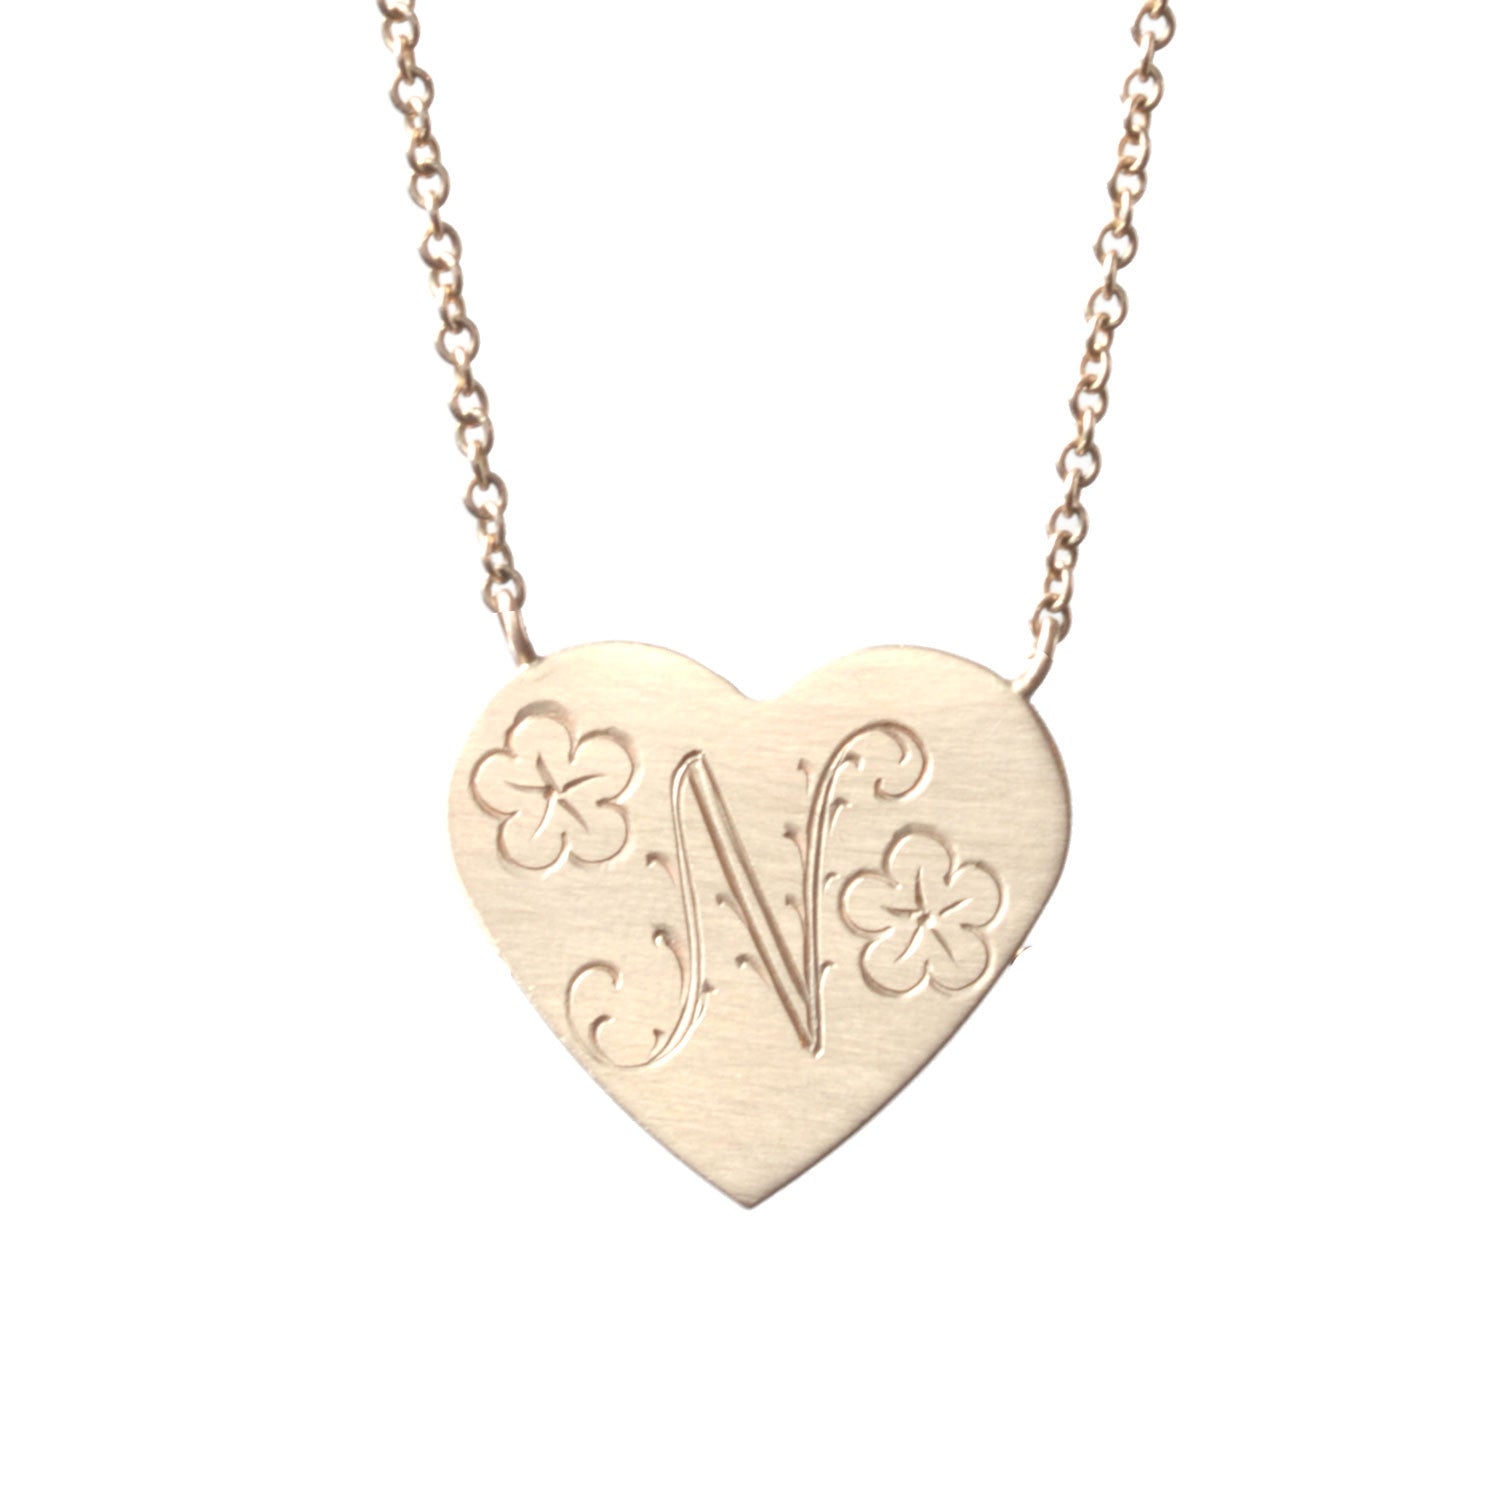 The Hand Engraved Heart Pendant Necklace - Material : 14kt Yellow Gold - The M Jewelers